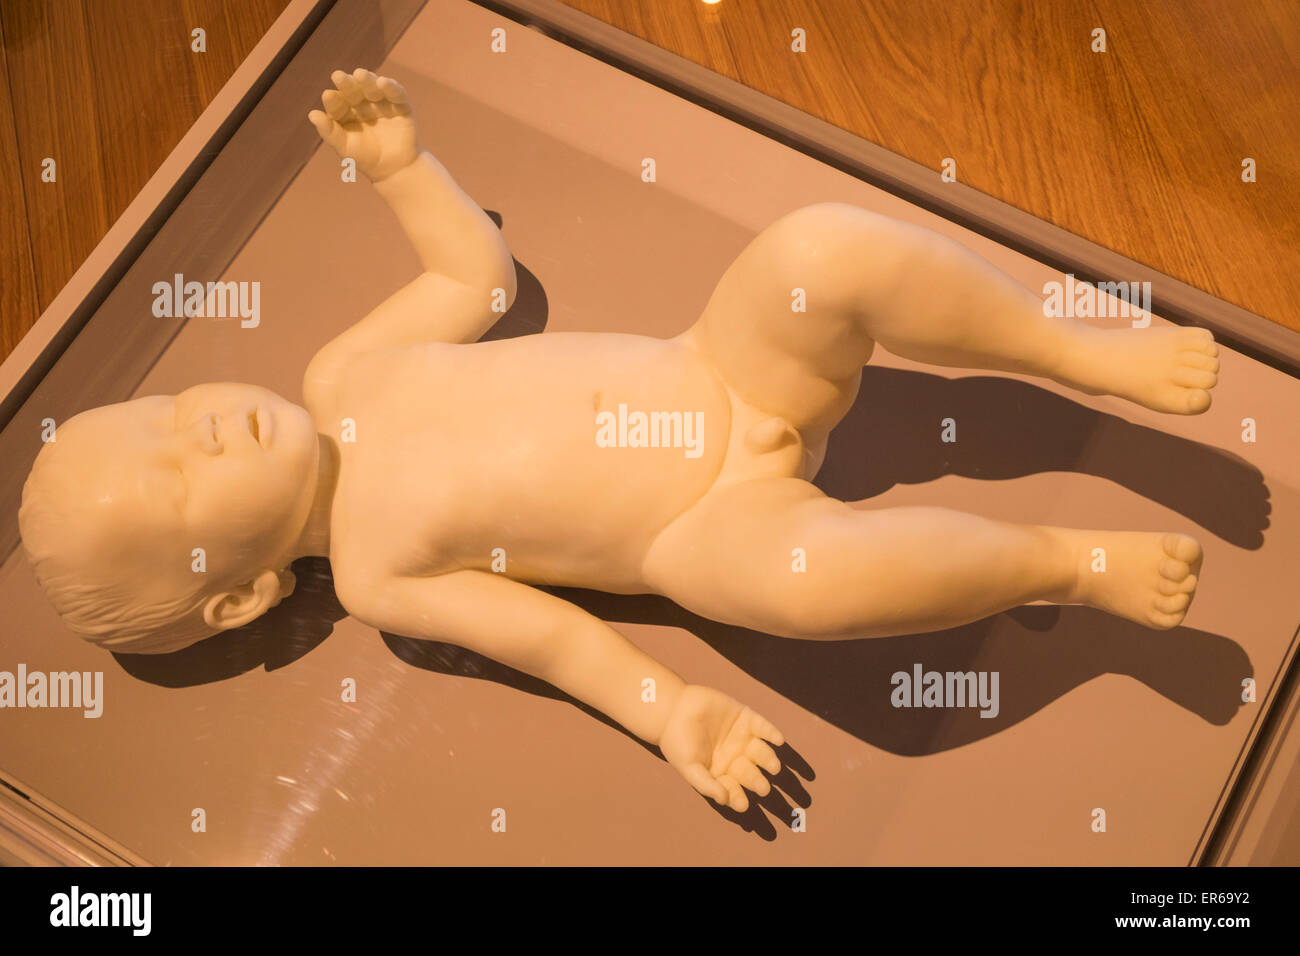 England, London, The Wellcome Collection, The Reading Room, Wax Figure of a Baby titled "Free" by Marc Quinn 2005 Stock Photo